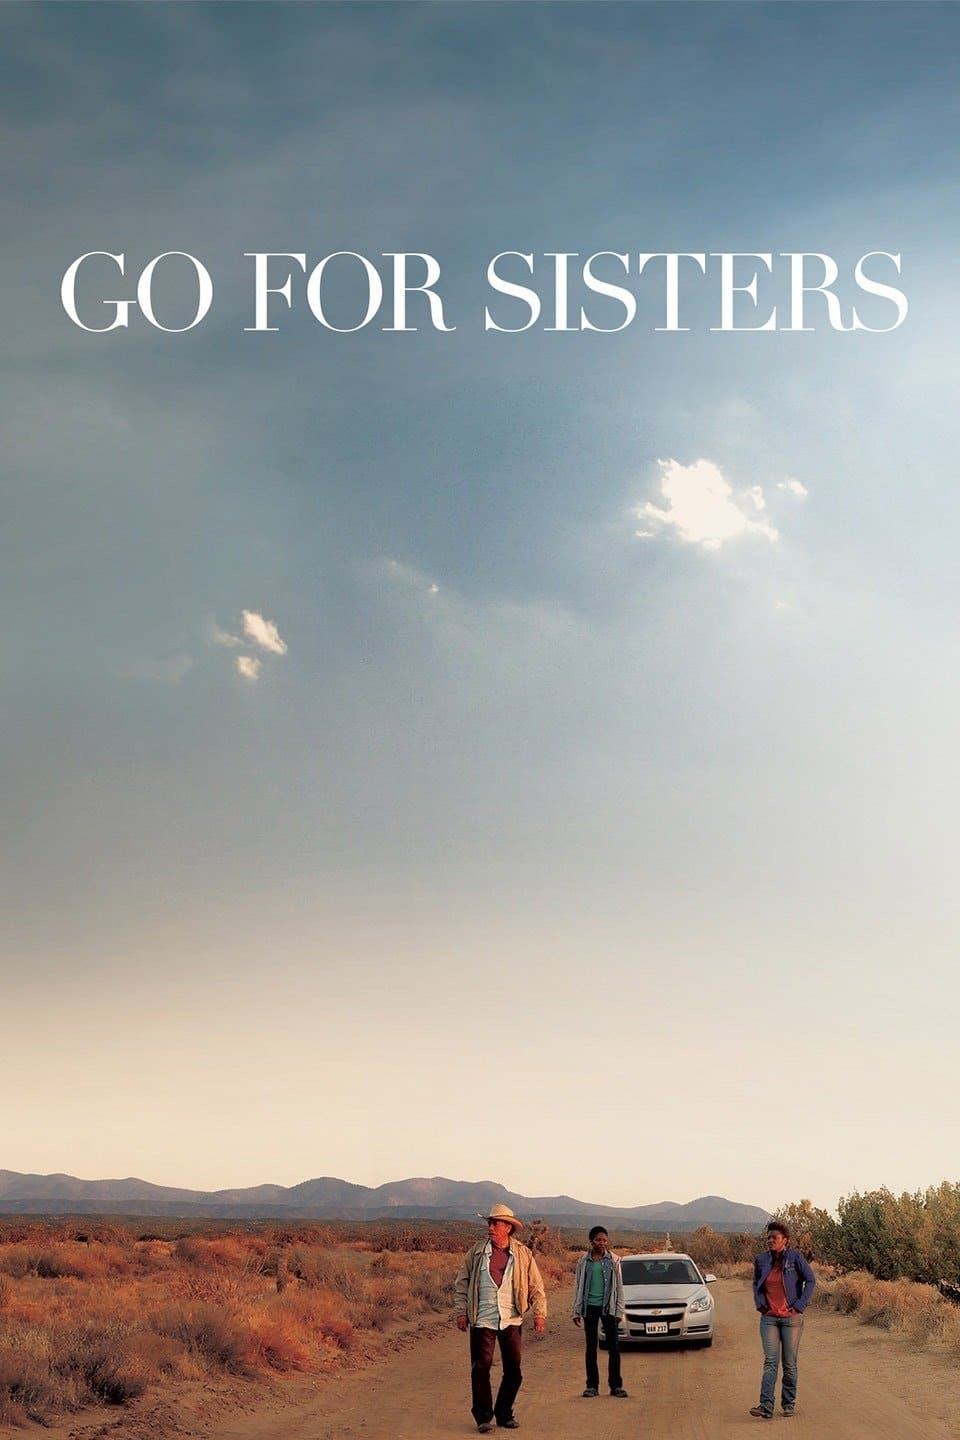 Go for Sisters (2013)